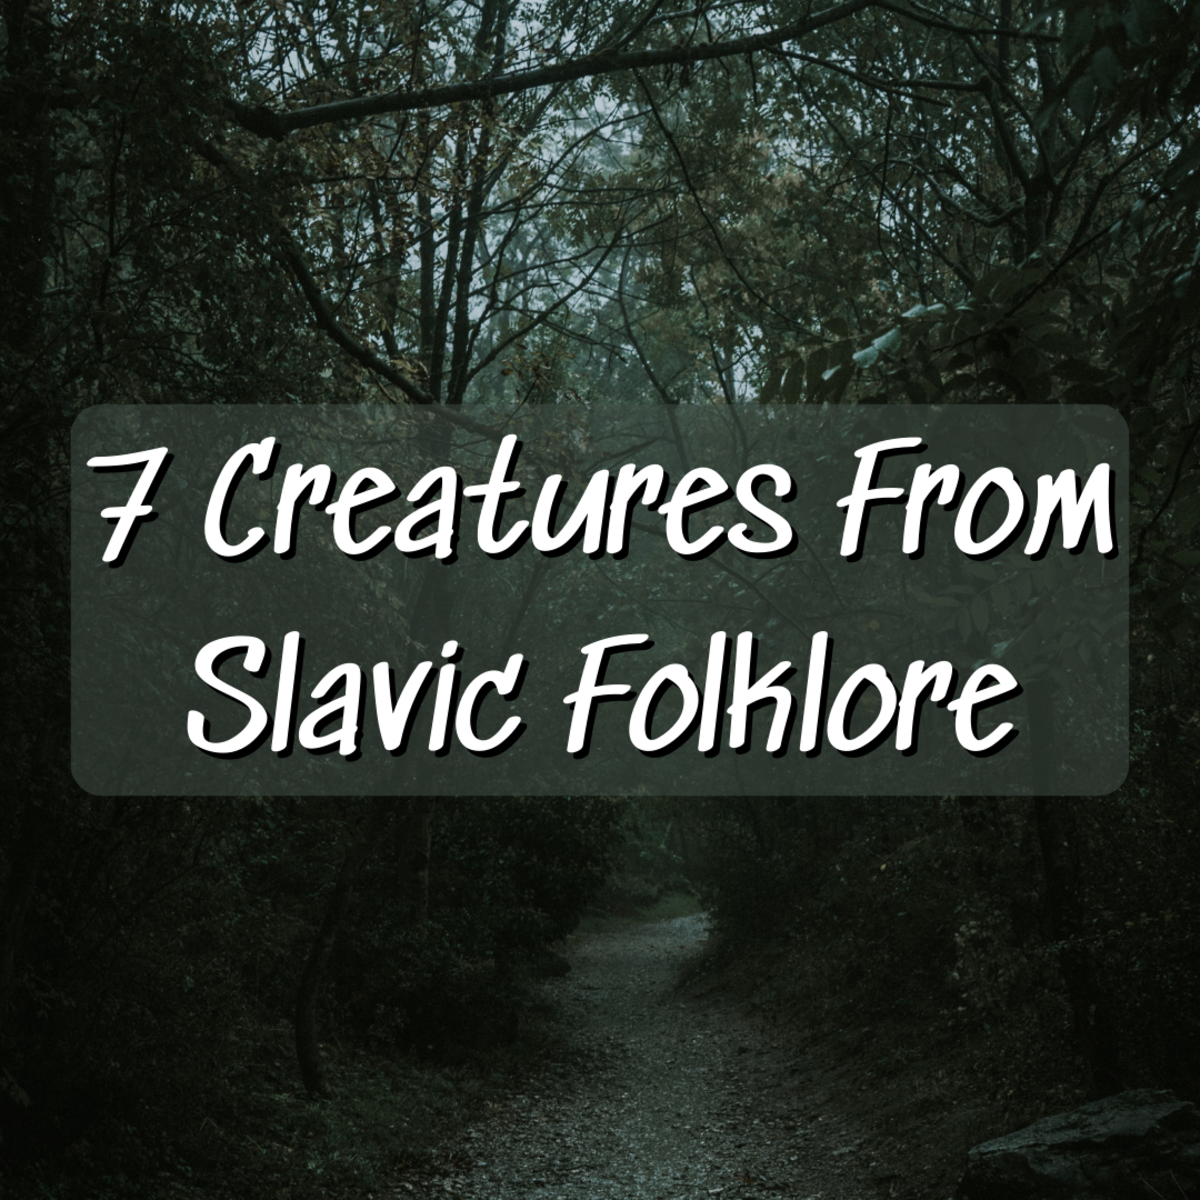 Read on to learn all about 7 intriguing creatures that haunt Slavic folklore.